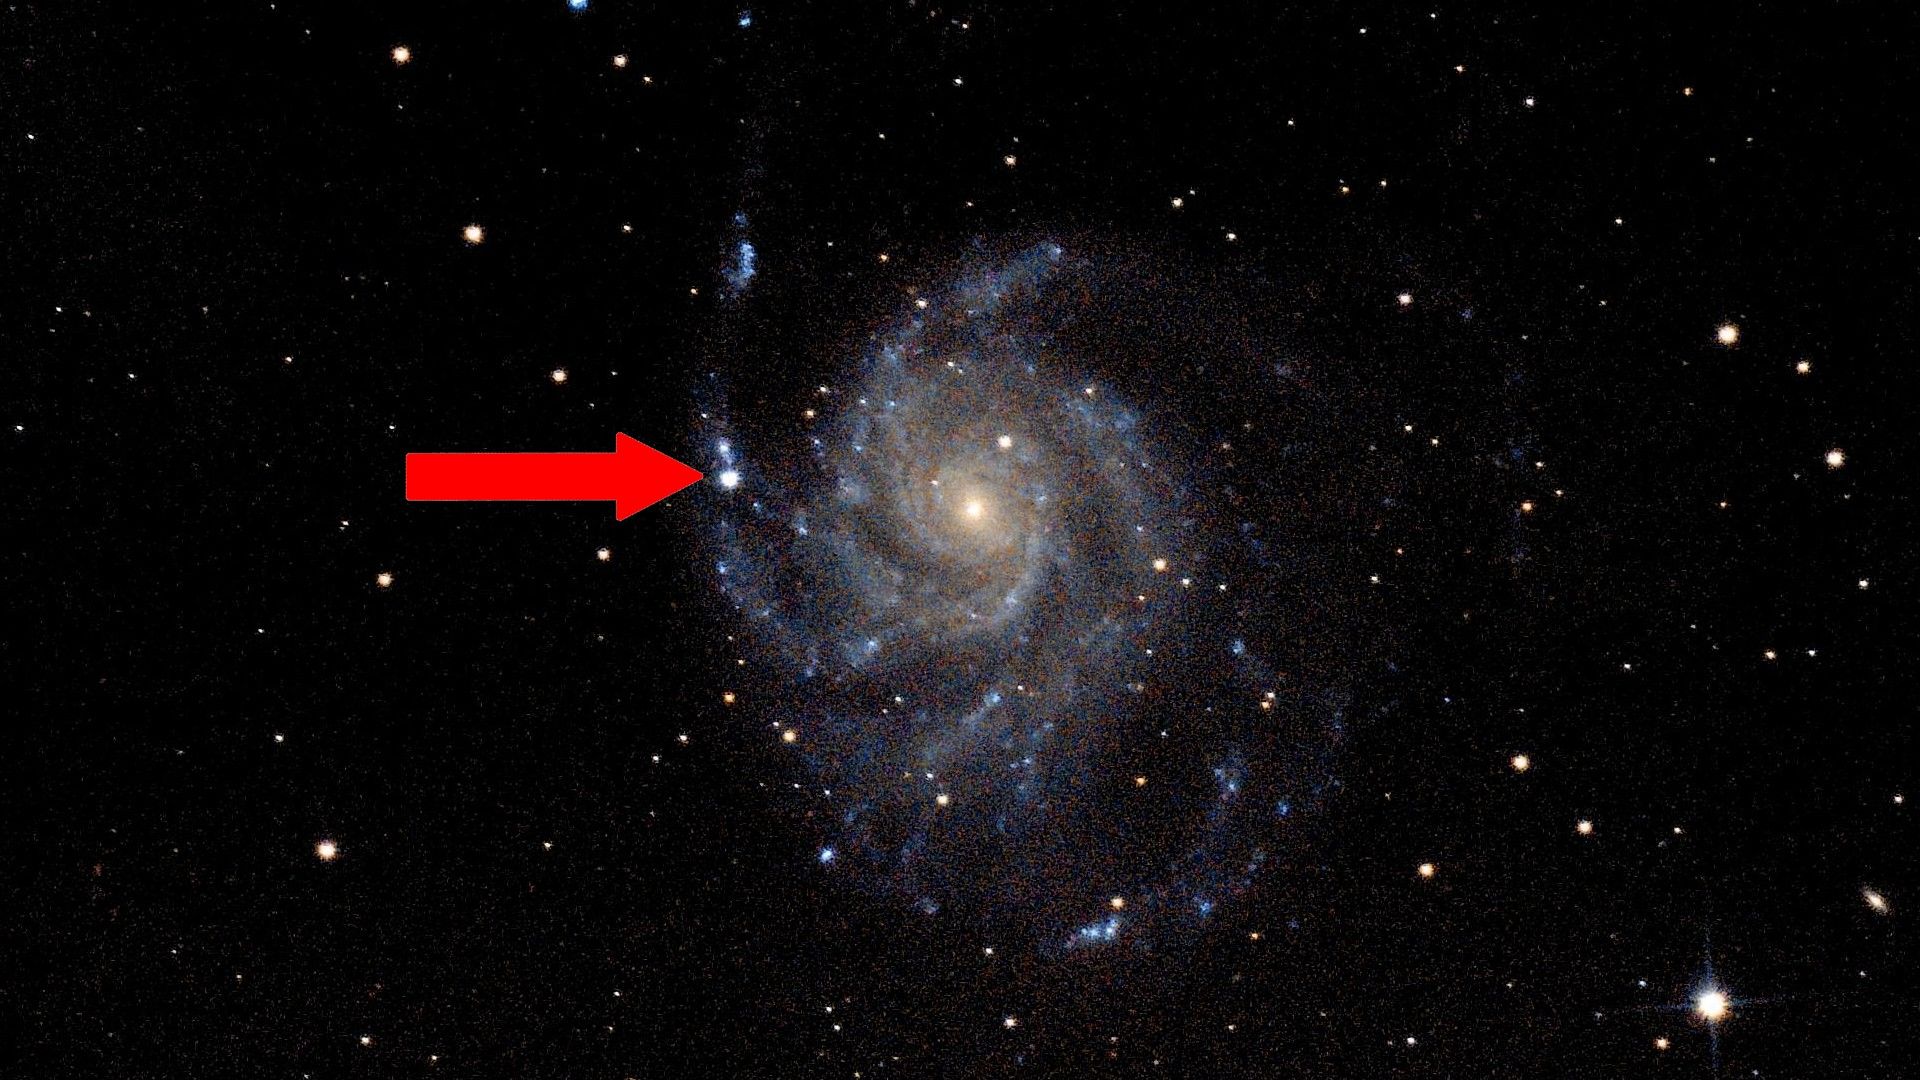 How to see the new supernova in the Pinwheel Galaxy Space